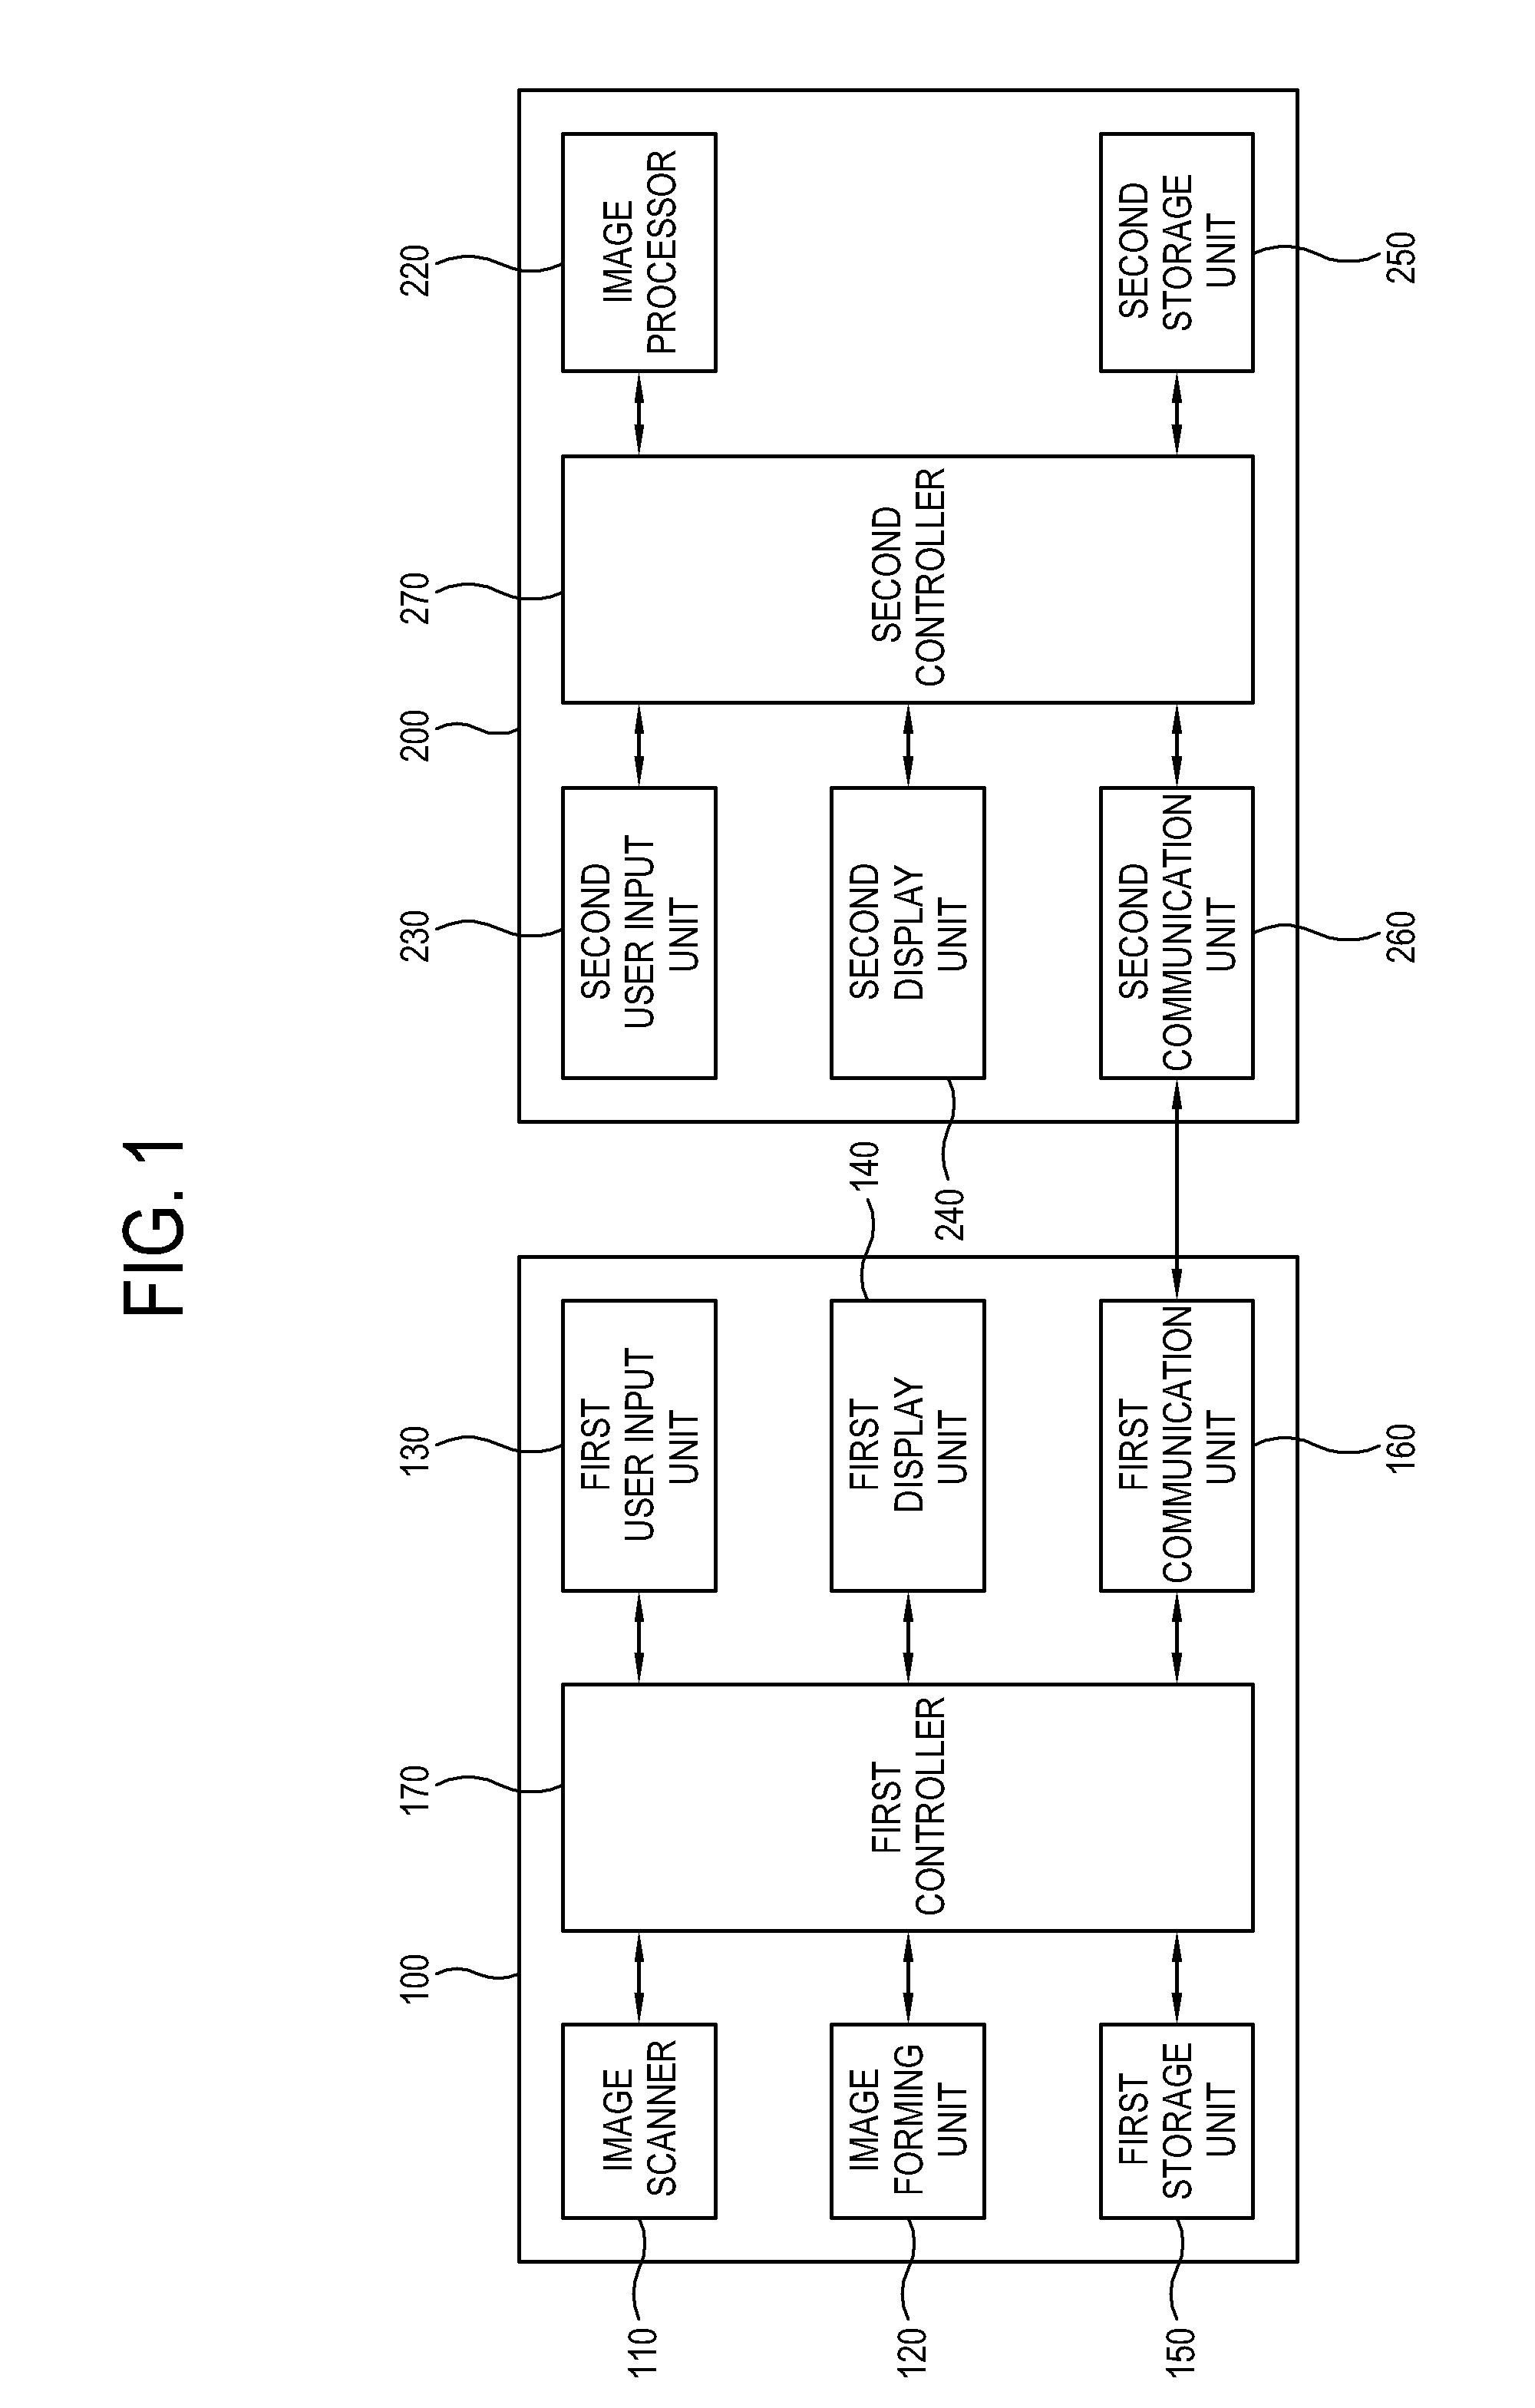 Image forming apparatus, host apparatus, and security copy method thereof